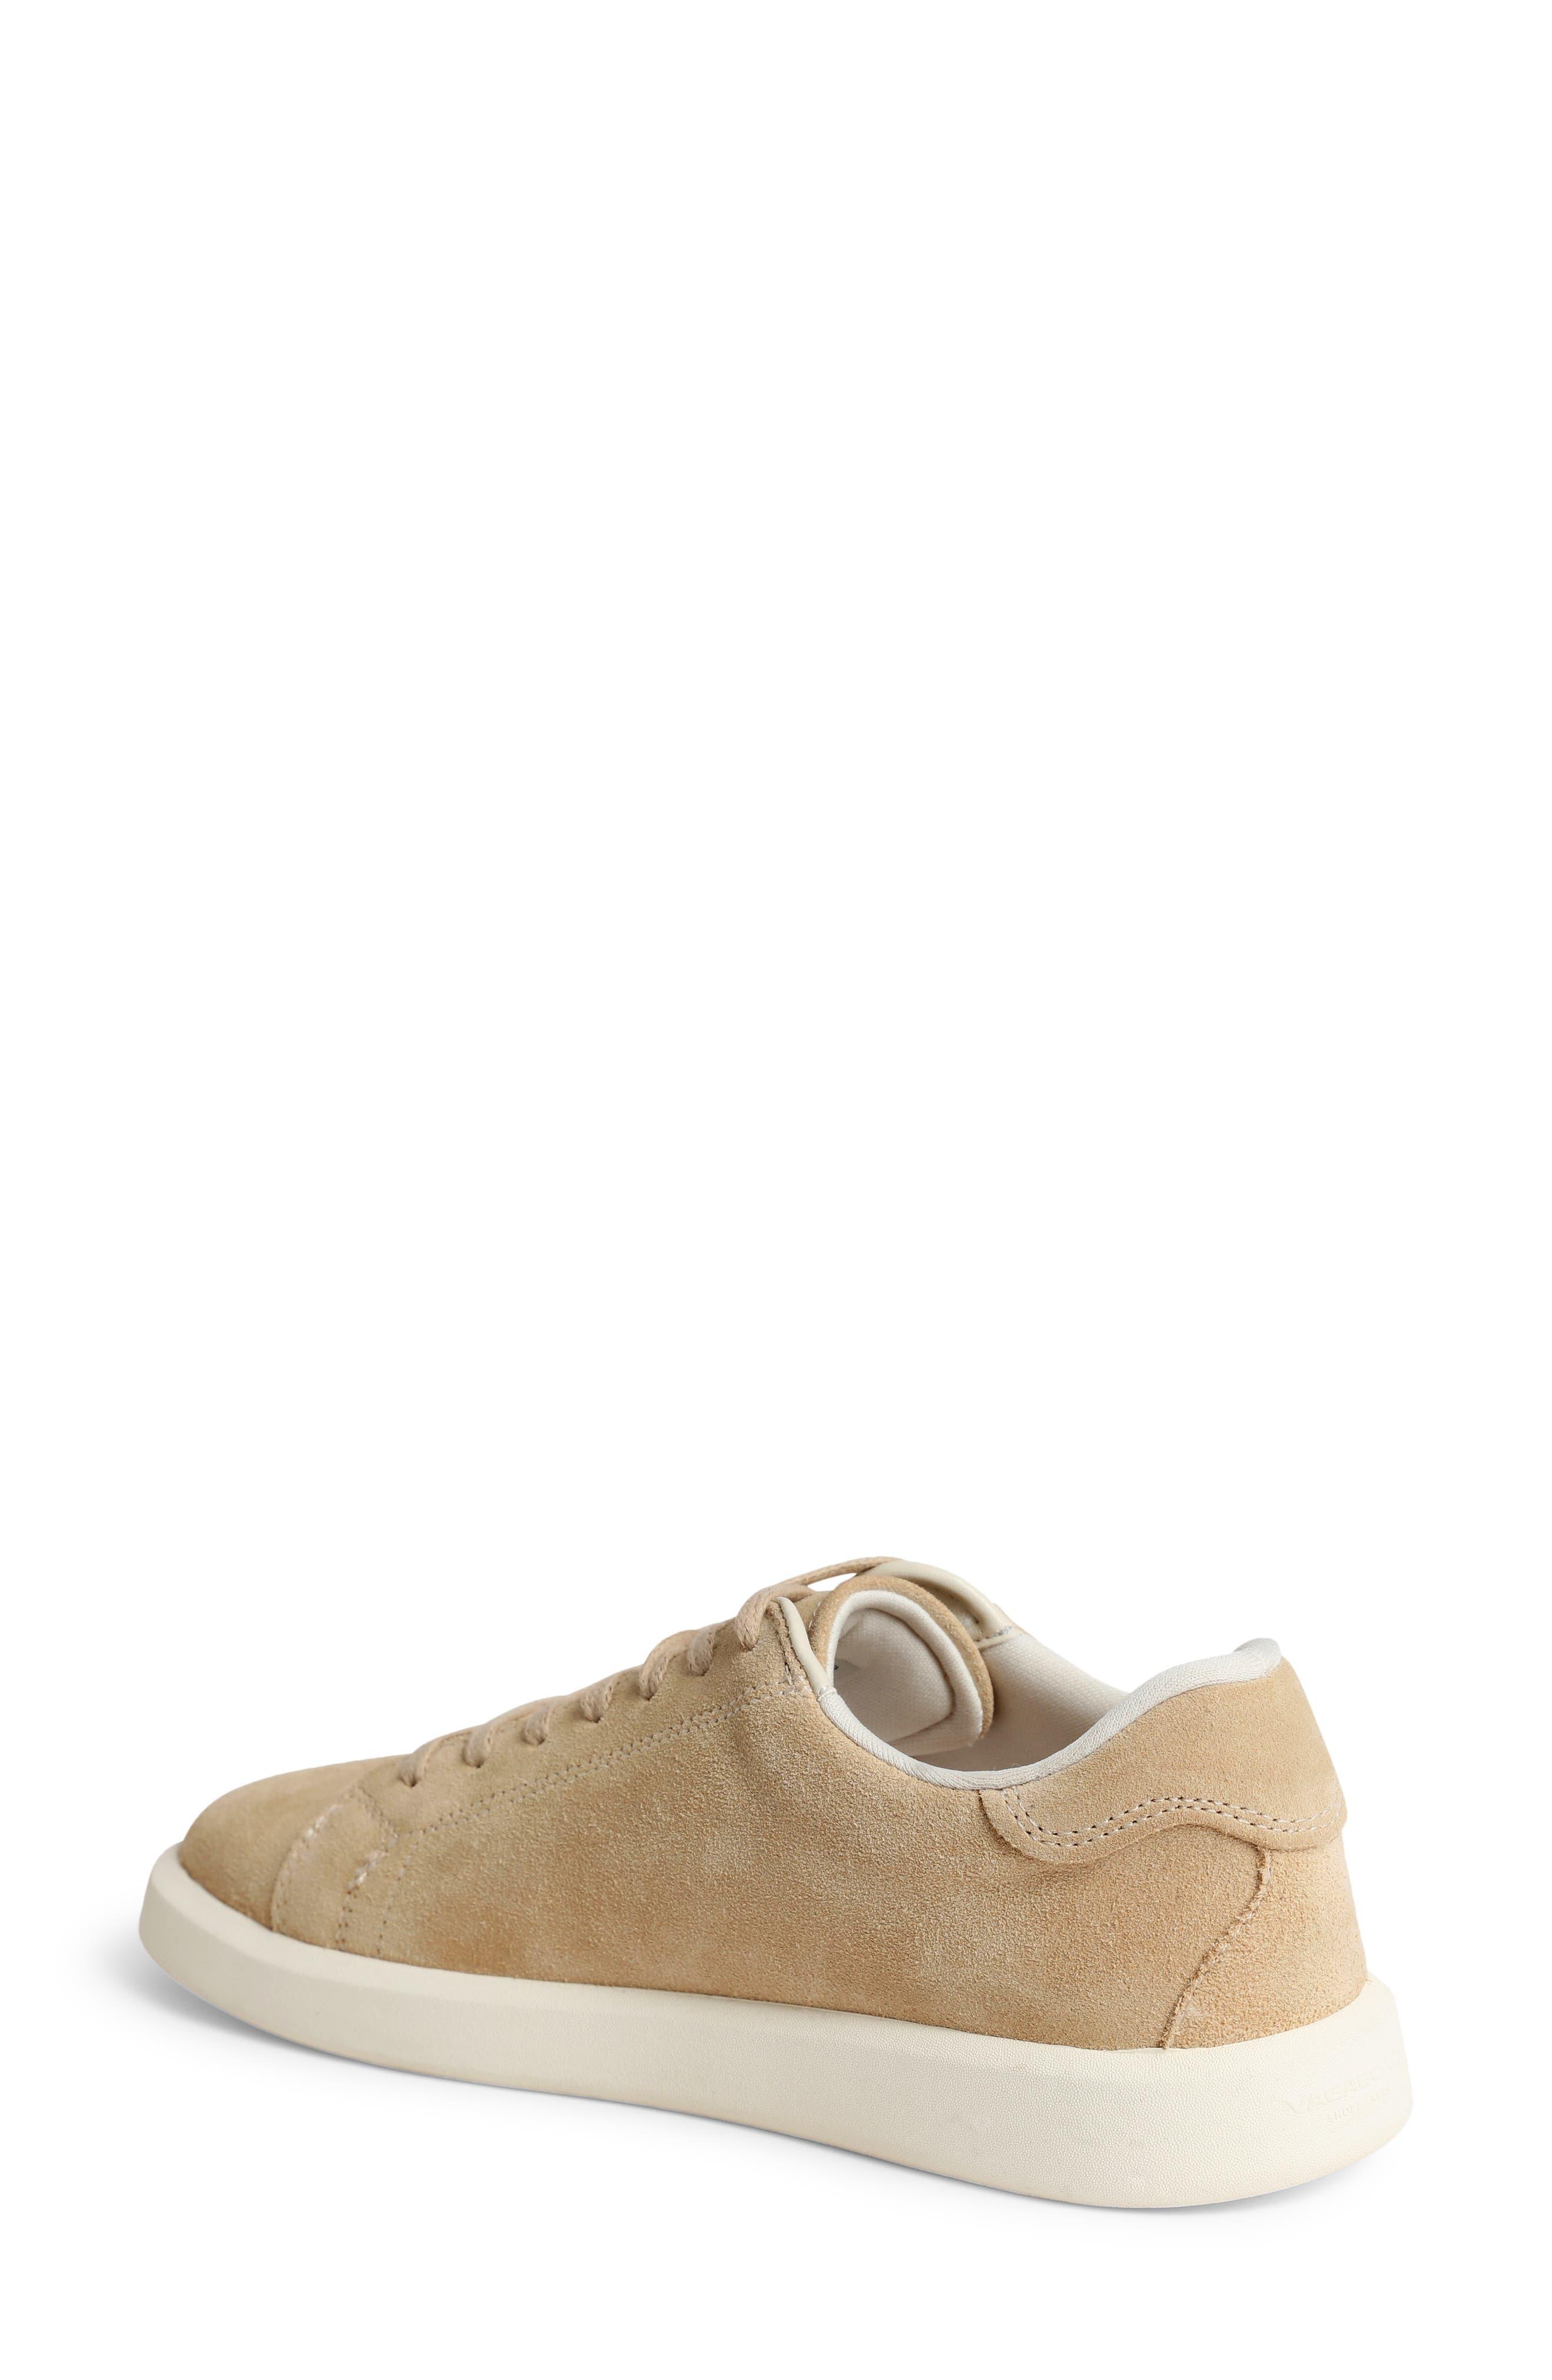 Vagabond Shoemakers Sneaker in Natural | Lyst